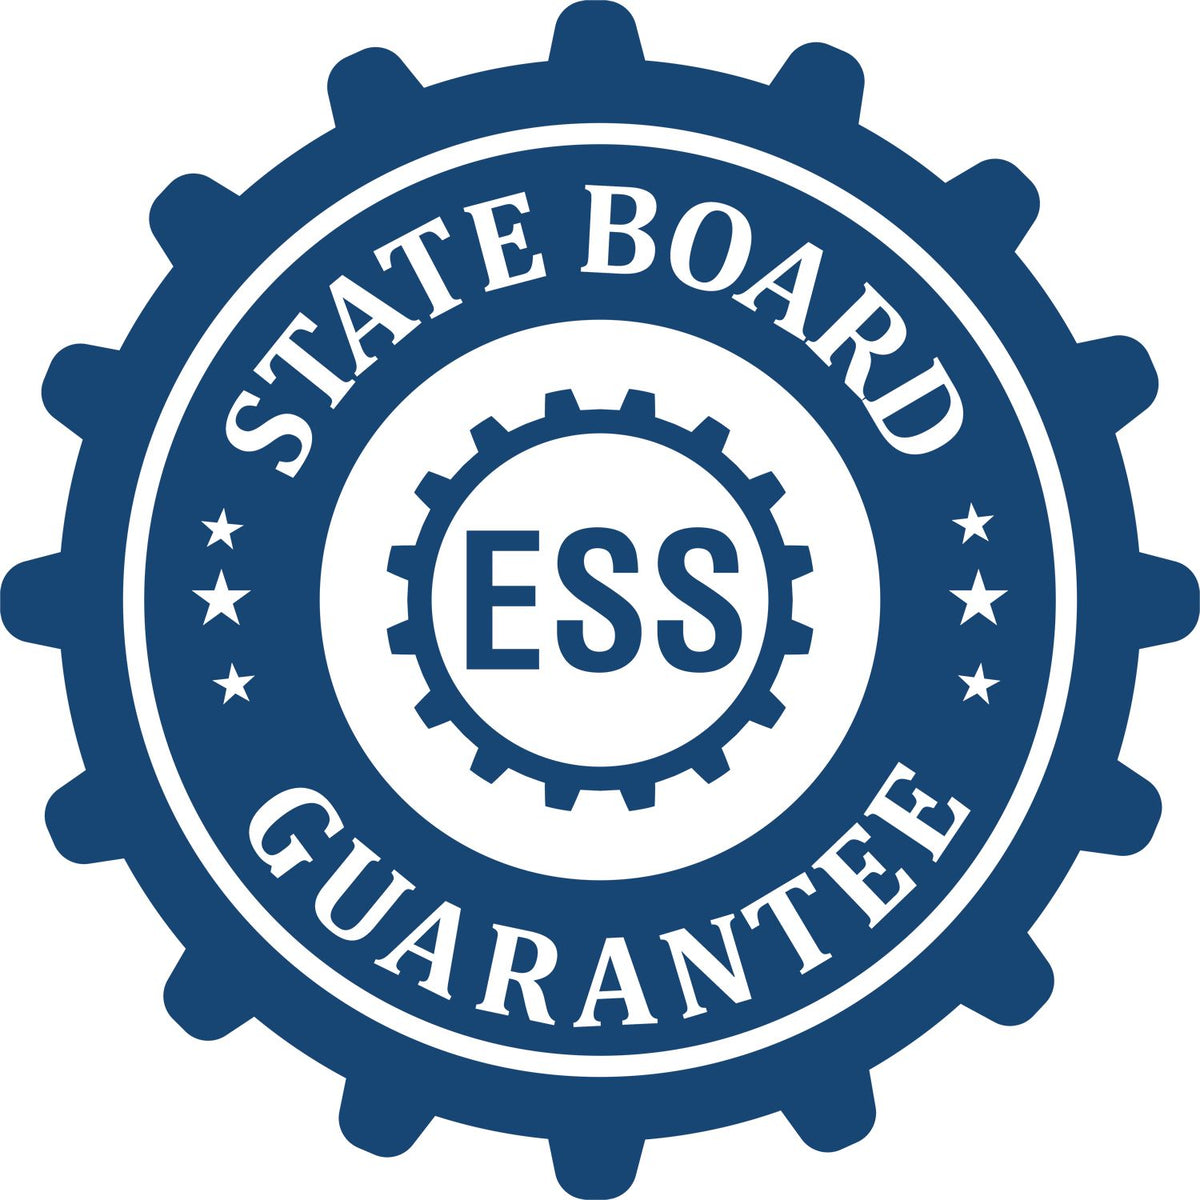 An emblem in a gear shape illustrating a state board guarantee for the Heavy Duty Cast Iron Alaska Engineer Seal Embosser product.